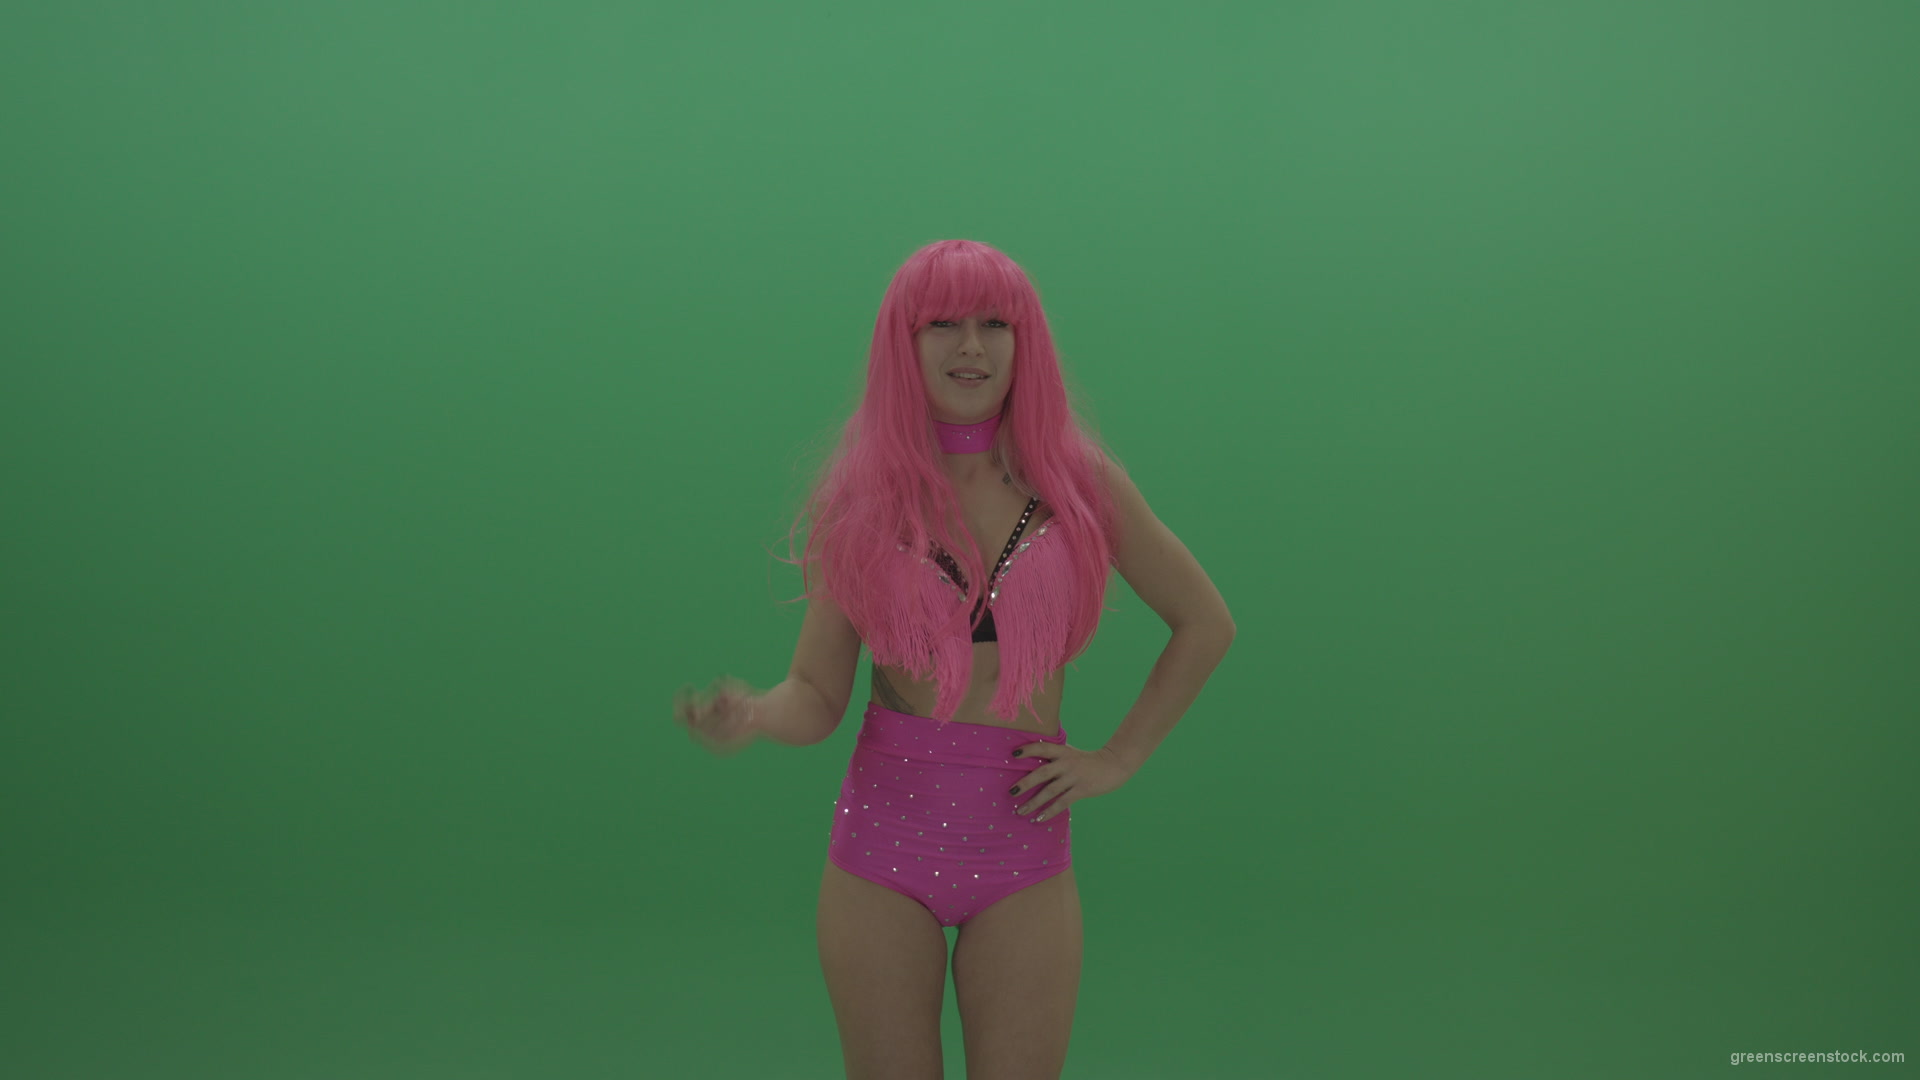 Gogo-dancer-in-pink-displays-an-amazing-pose-over-chromakey-background_008 Green Screen Stock